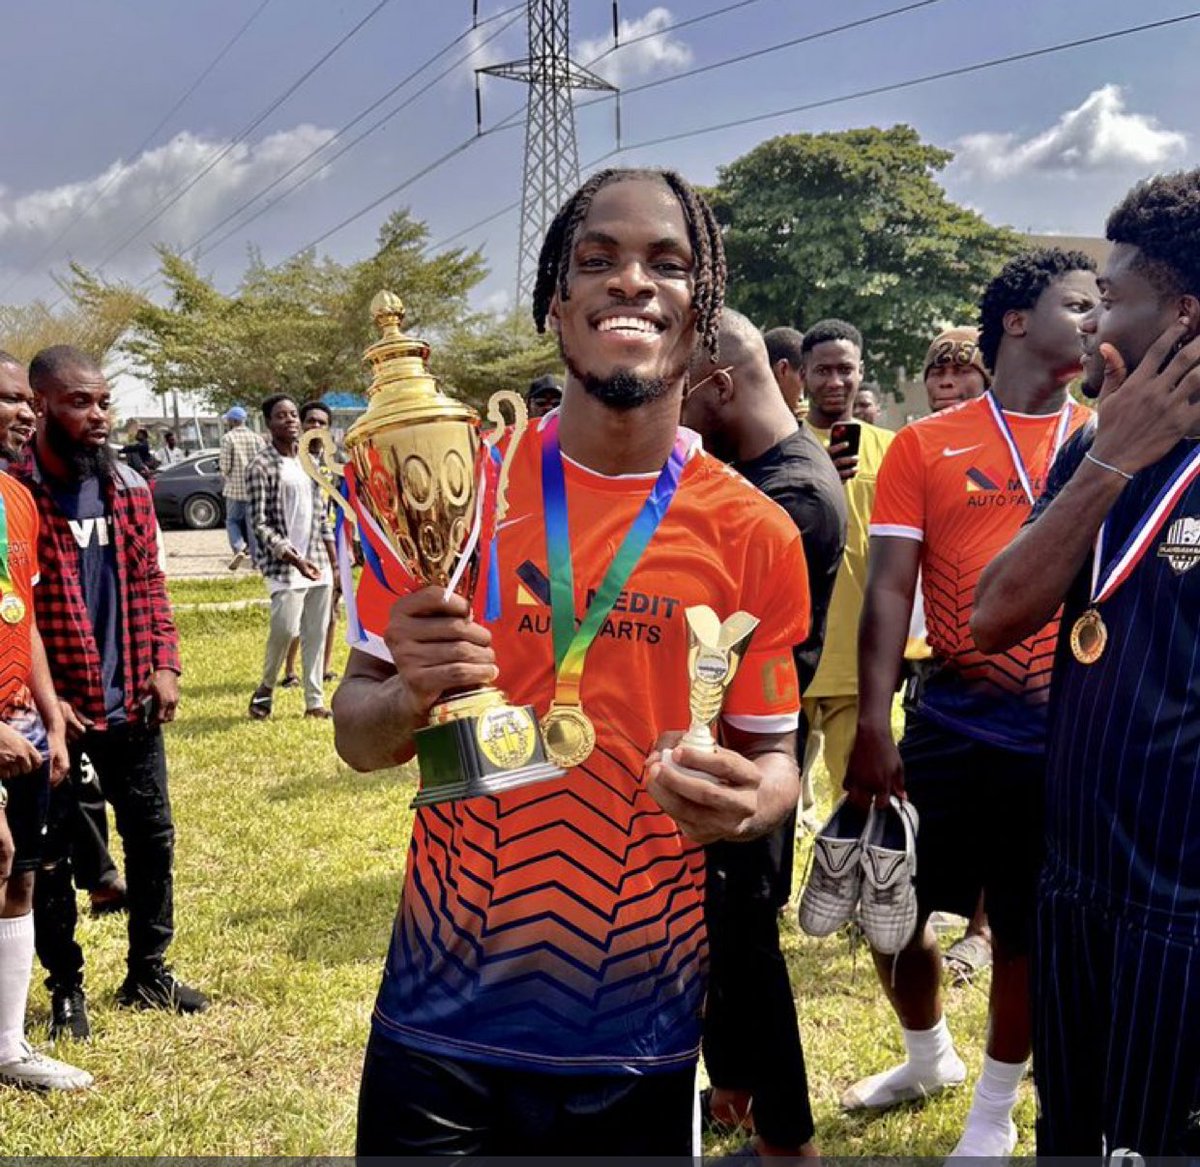 Returning to Our charity football match with a bang!! He won the MVP at the last event scoring one goal and grabbing one assist. With an all round 10/10 performance. But can he do the same come 20th? Ladies and Gent, @iamdikeh !!